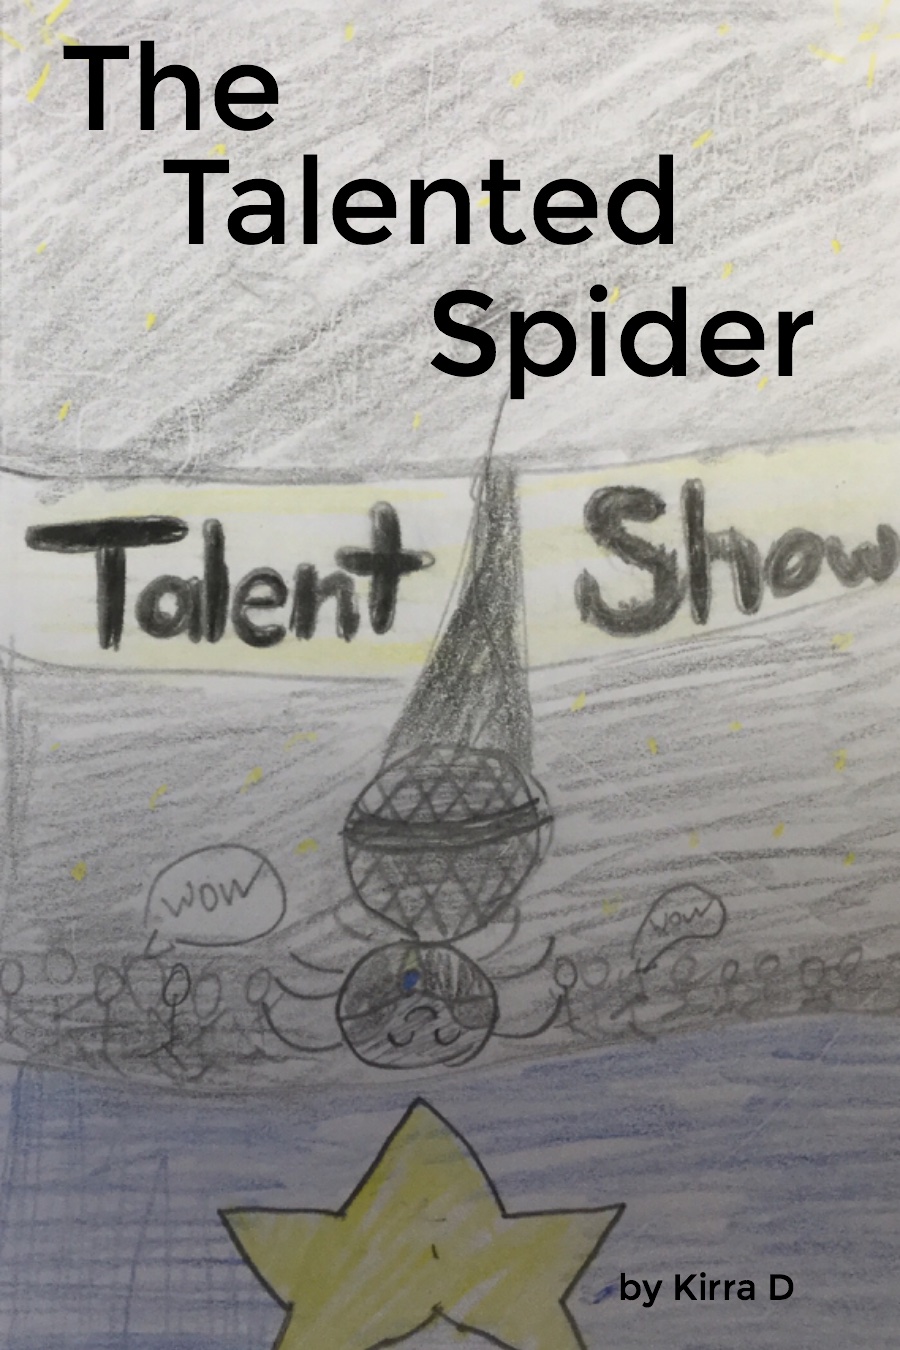 The Talented Spider by Kirra D